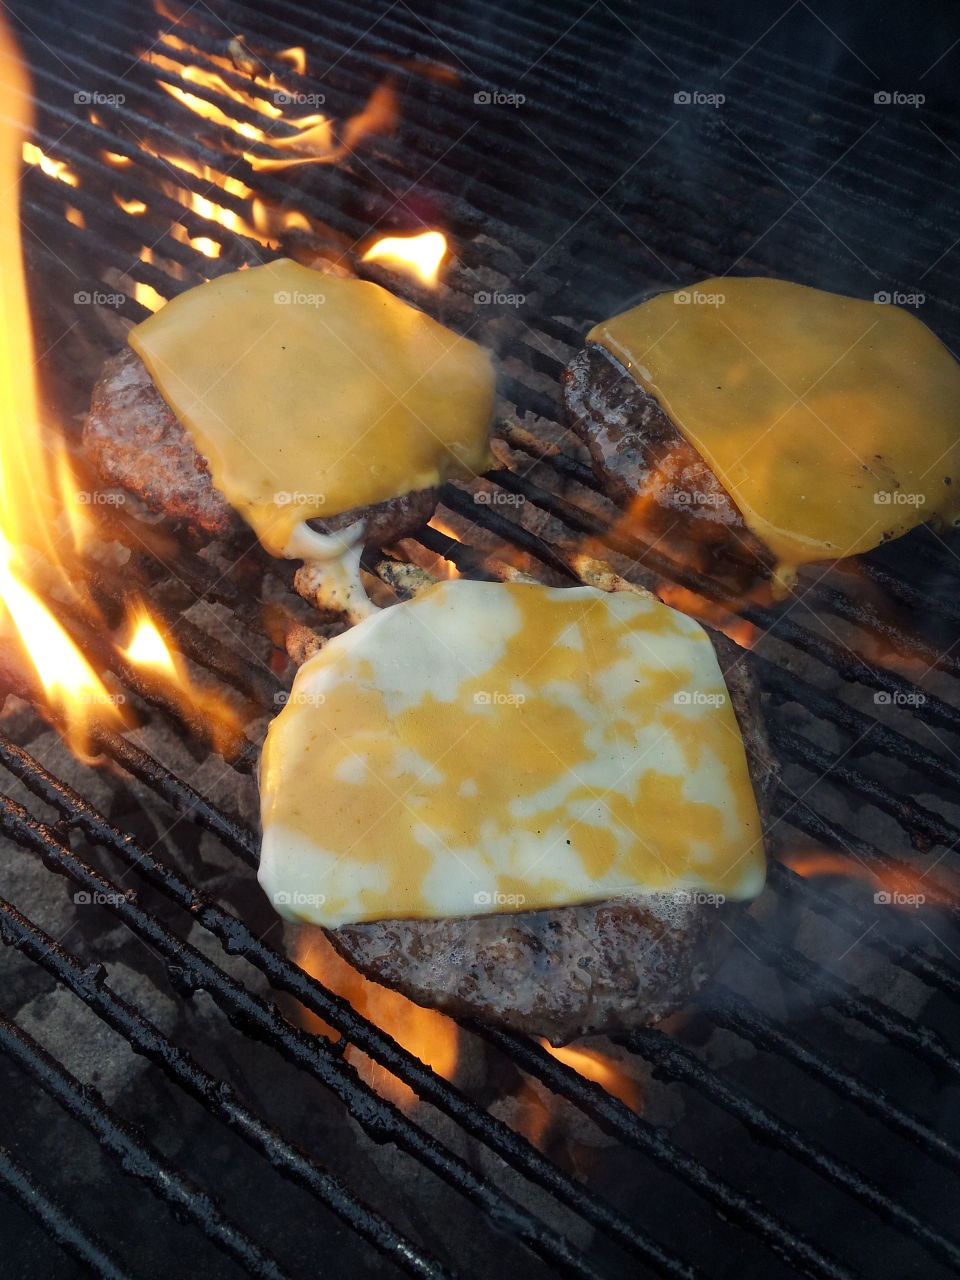 Flame kissed cheese burgers on the grill